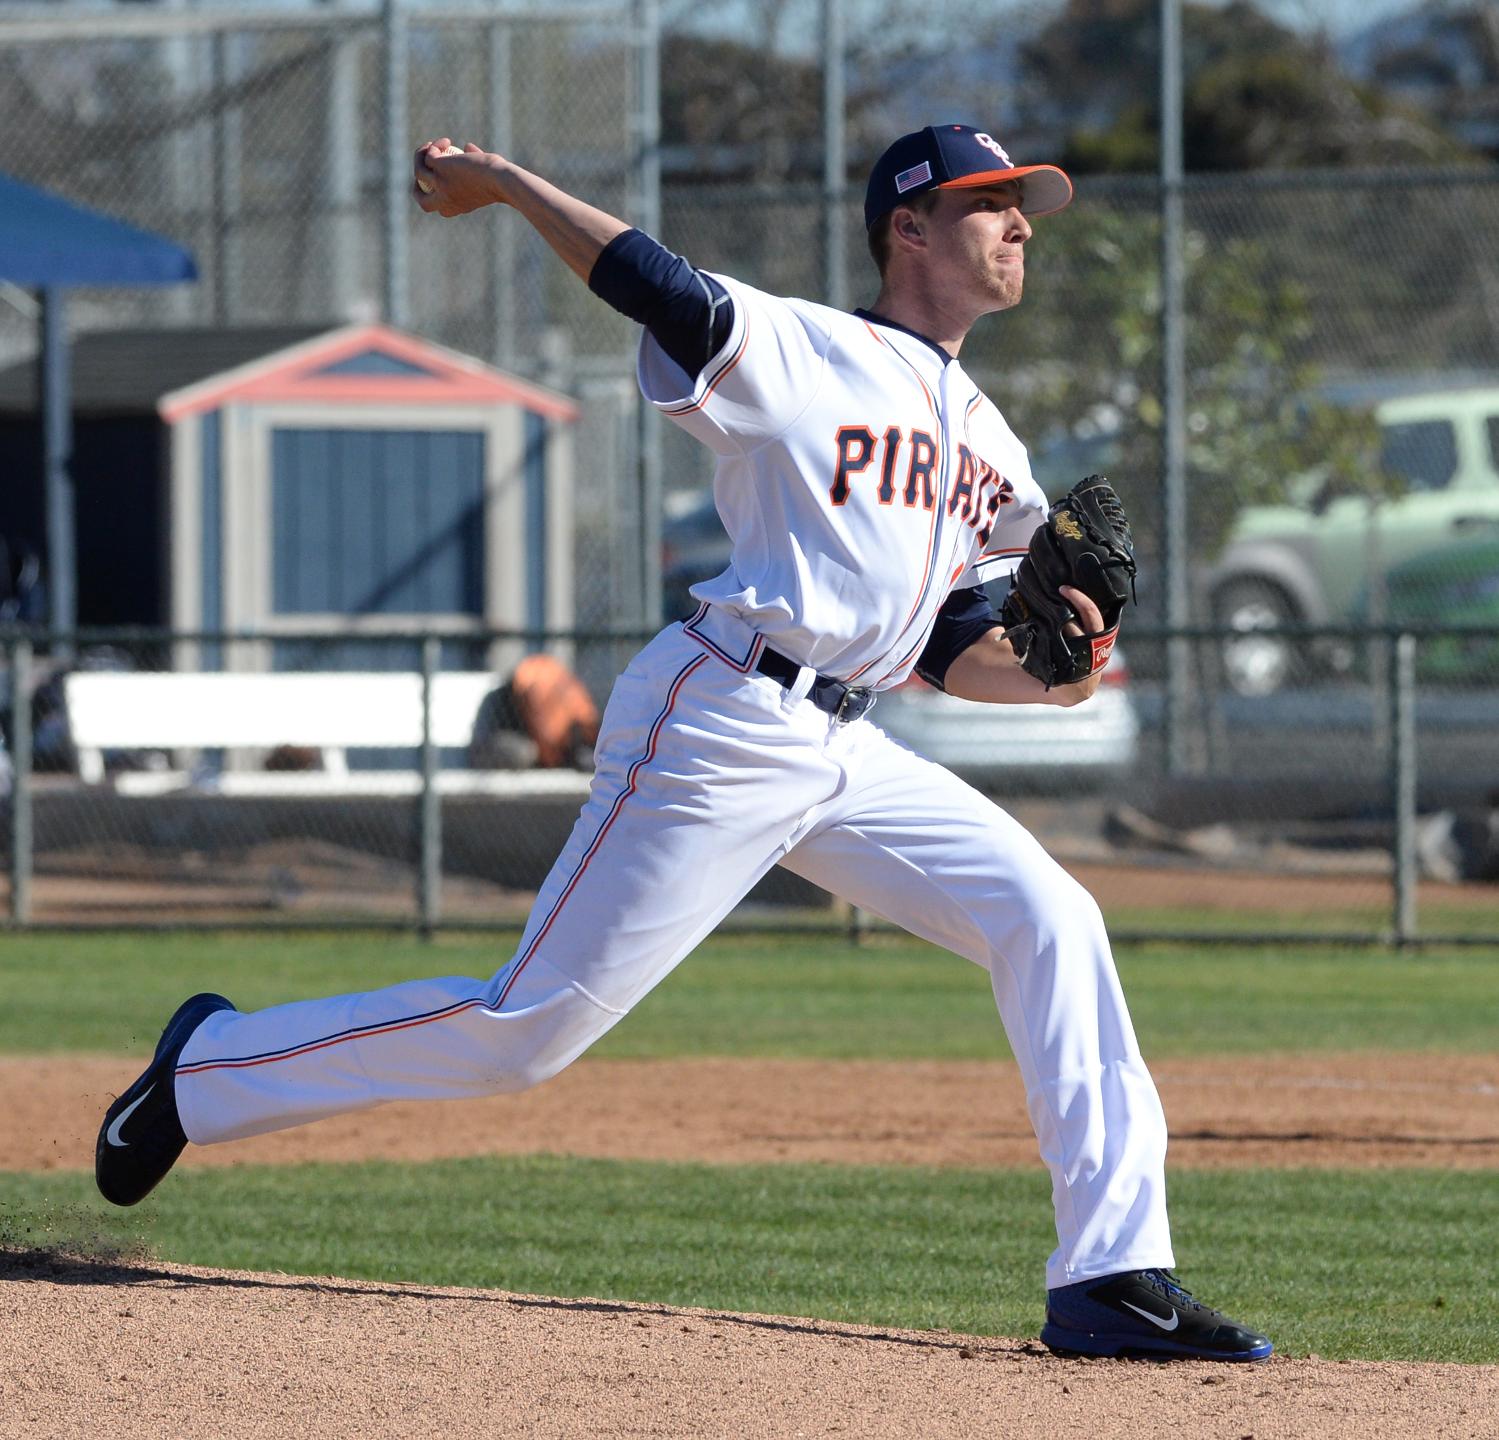 Pirates' struggles continue with 7-1 loss to Riverside